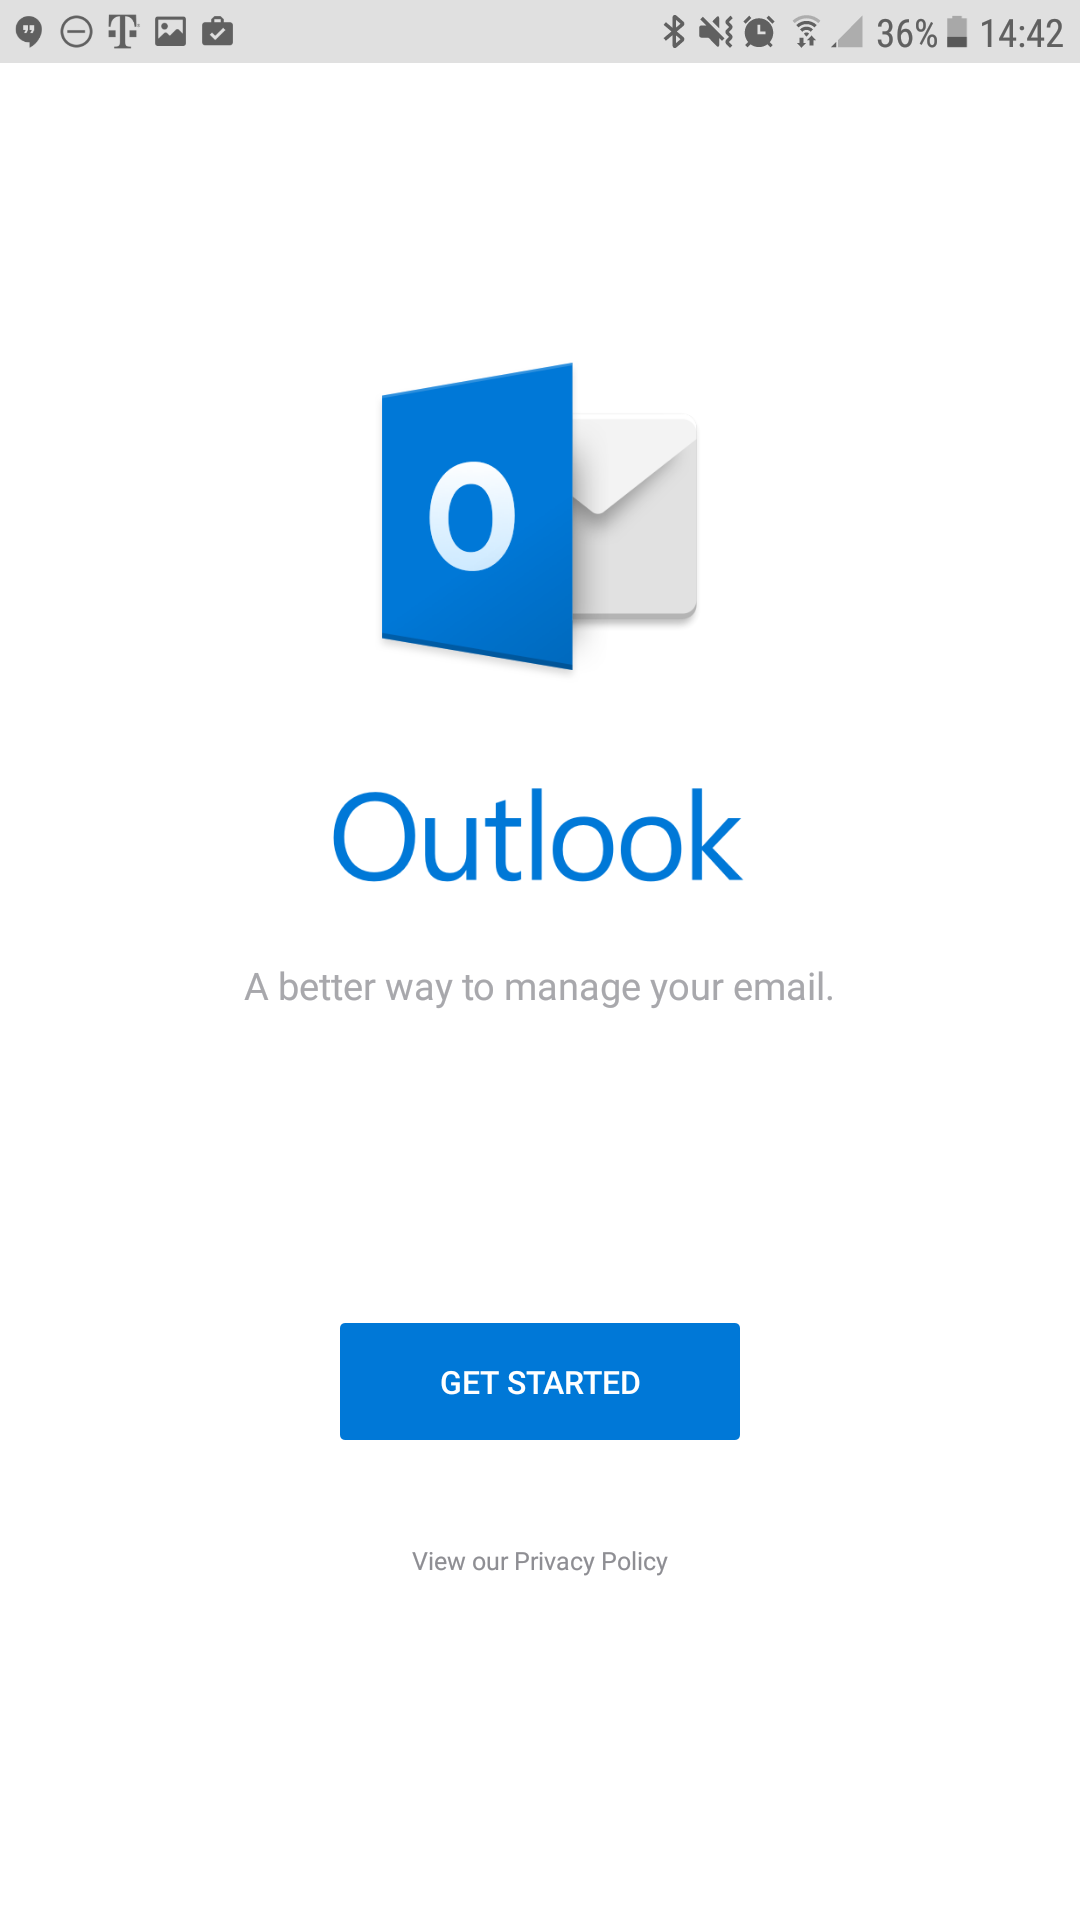 can i add a picture to an outlook android app email signature